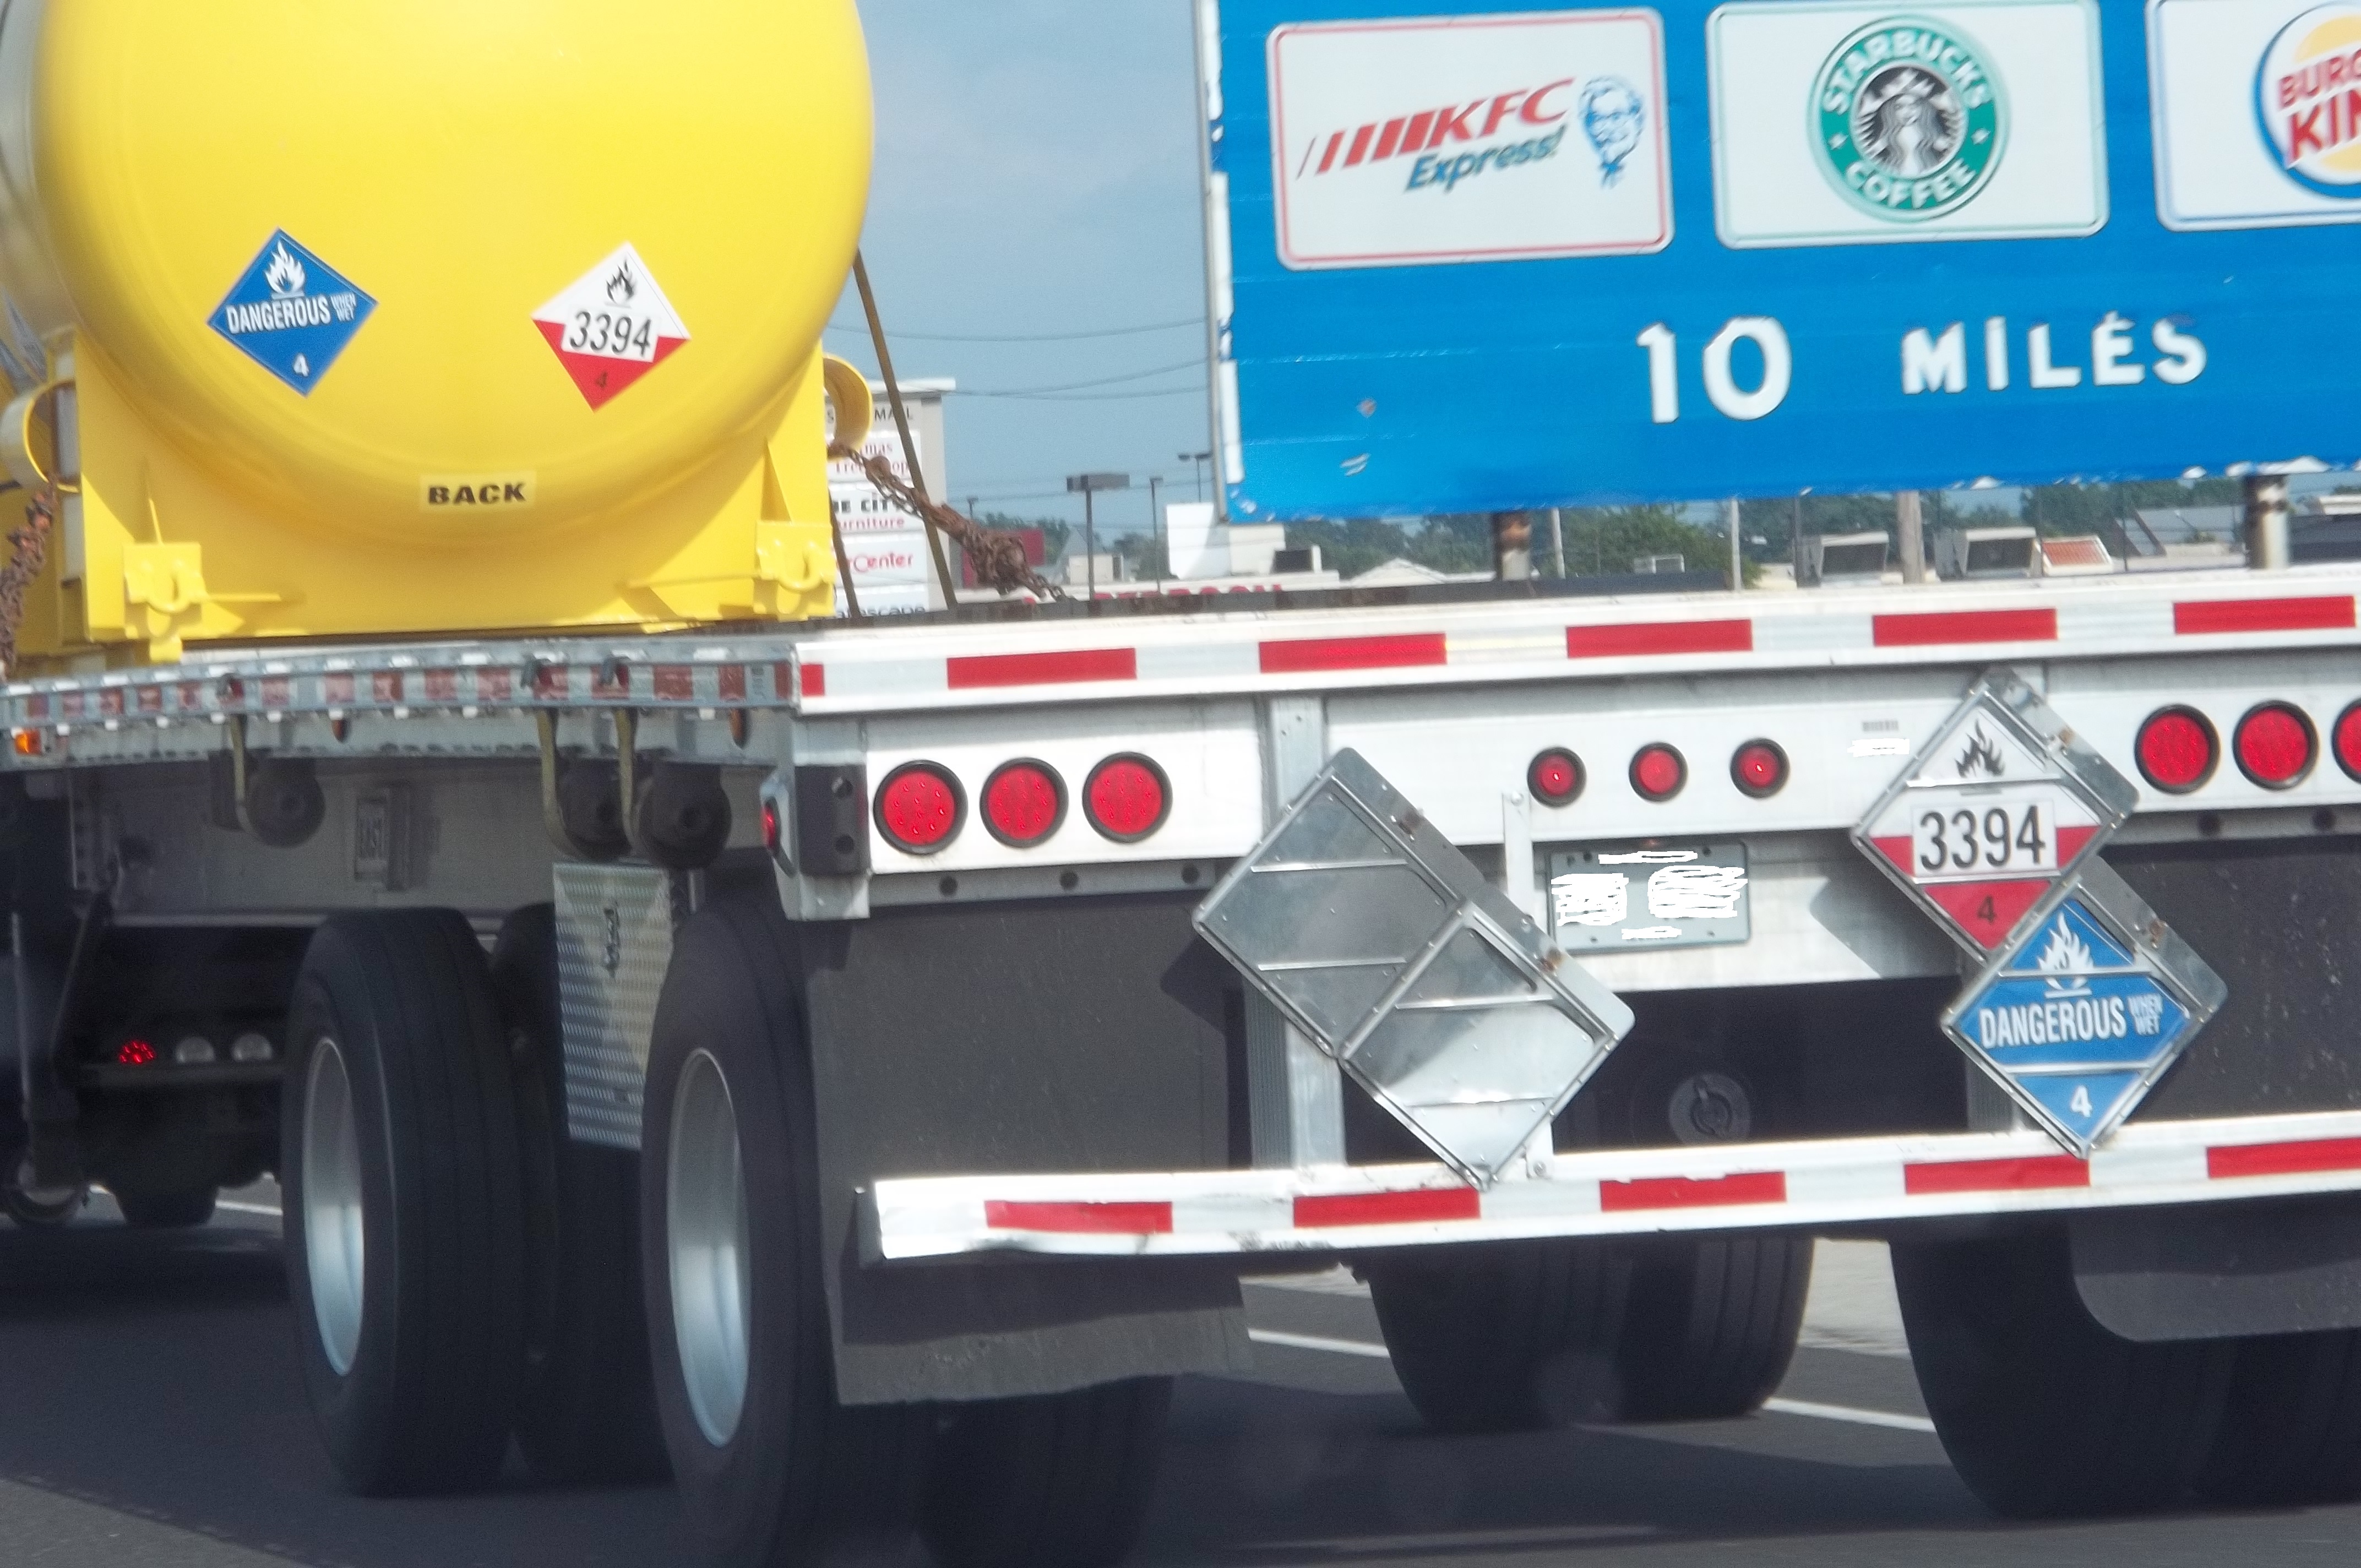 What's on That Truck? The Identification of Hazardous Materials in